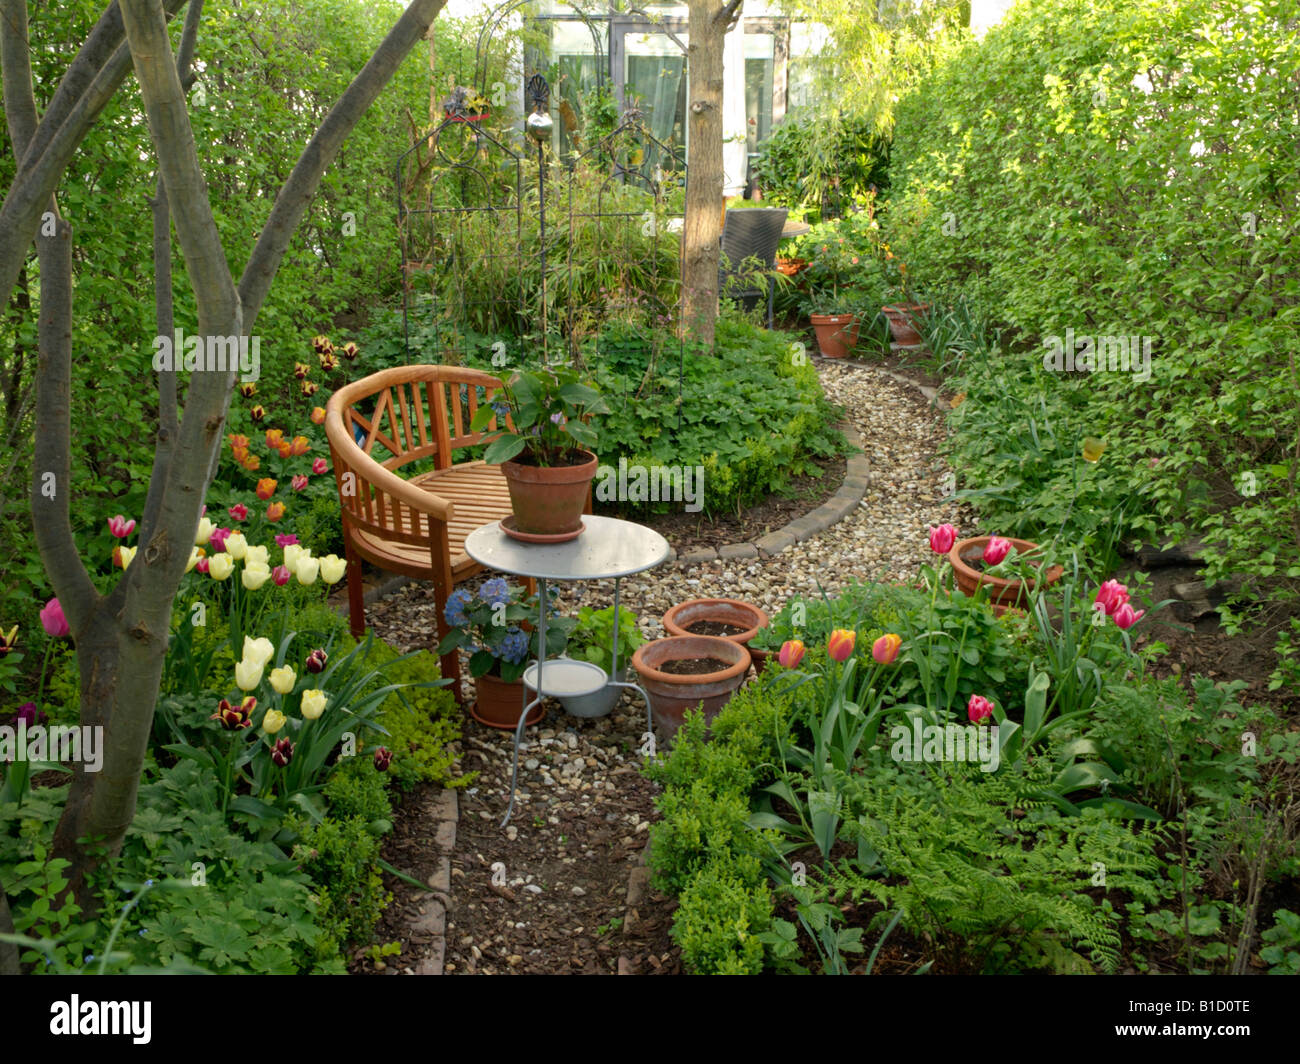 Row house garden with seating area Stock Photo